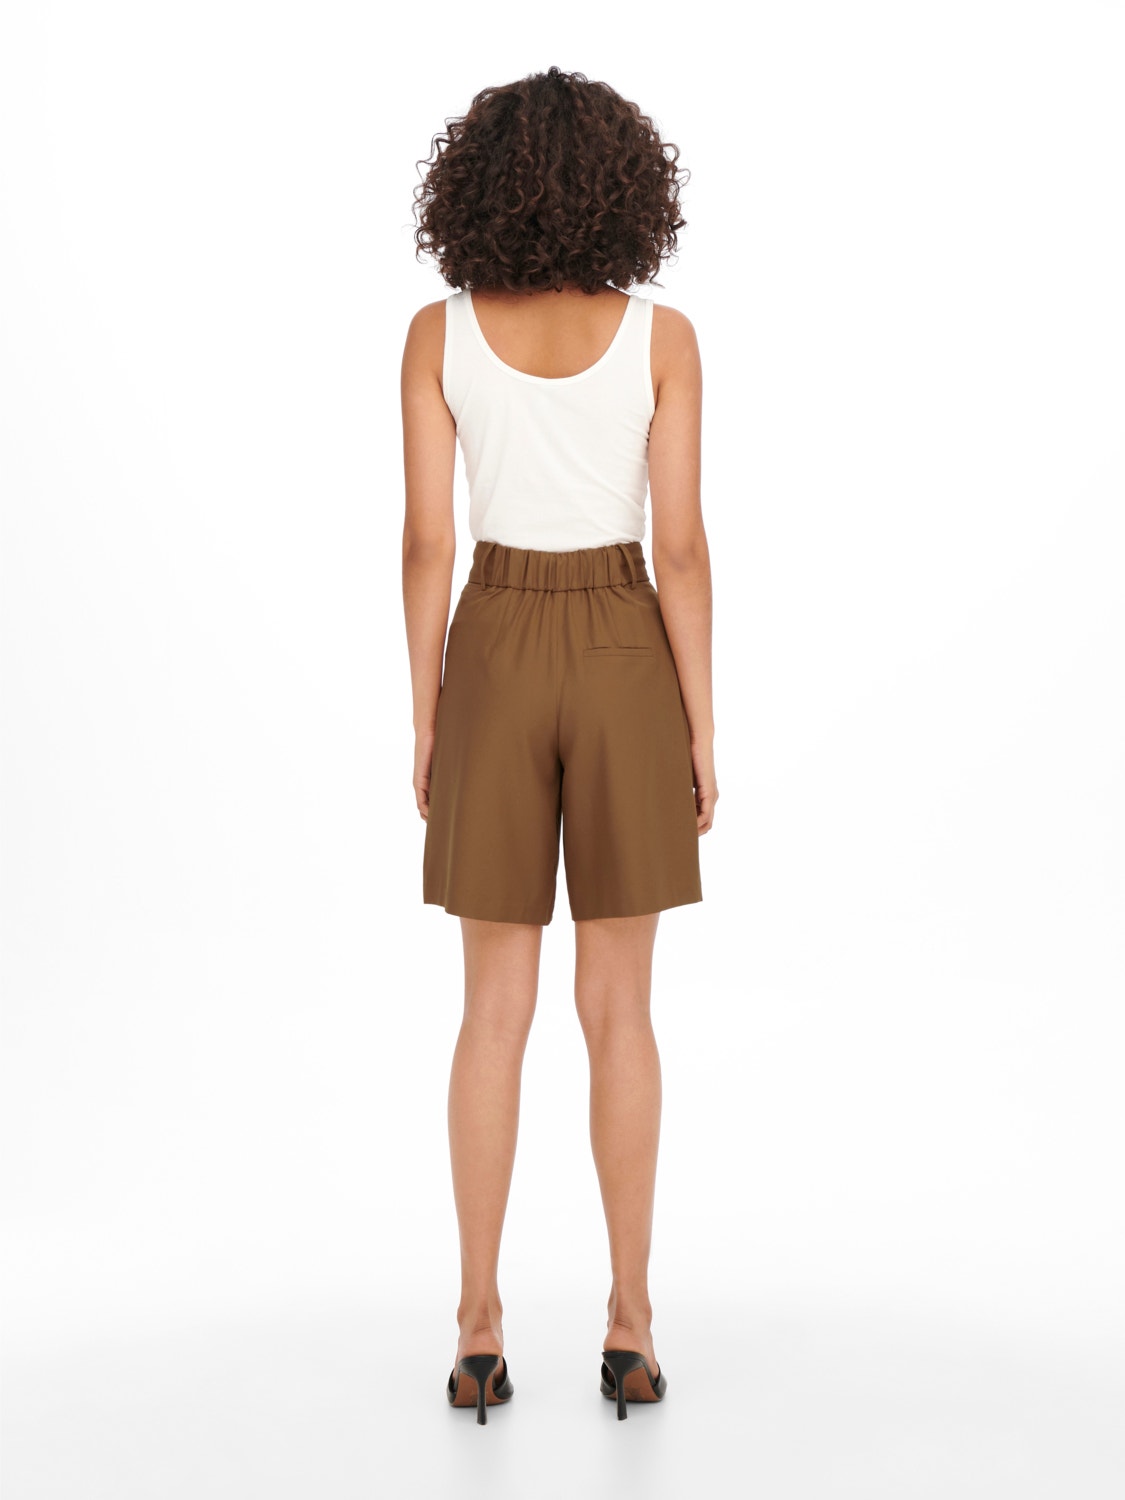 ONLY Normal passform Shorts -Toffee - 15259594